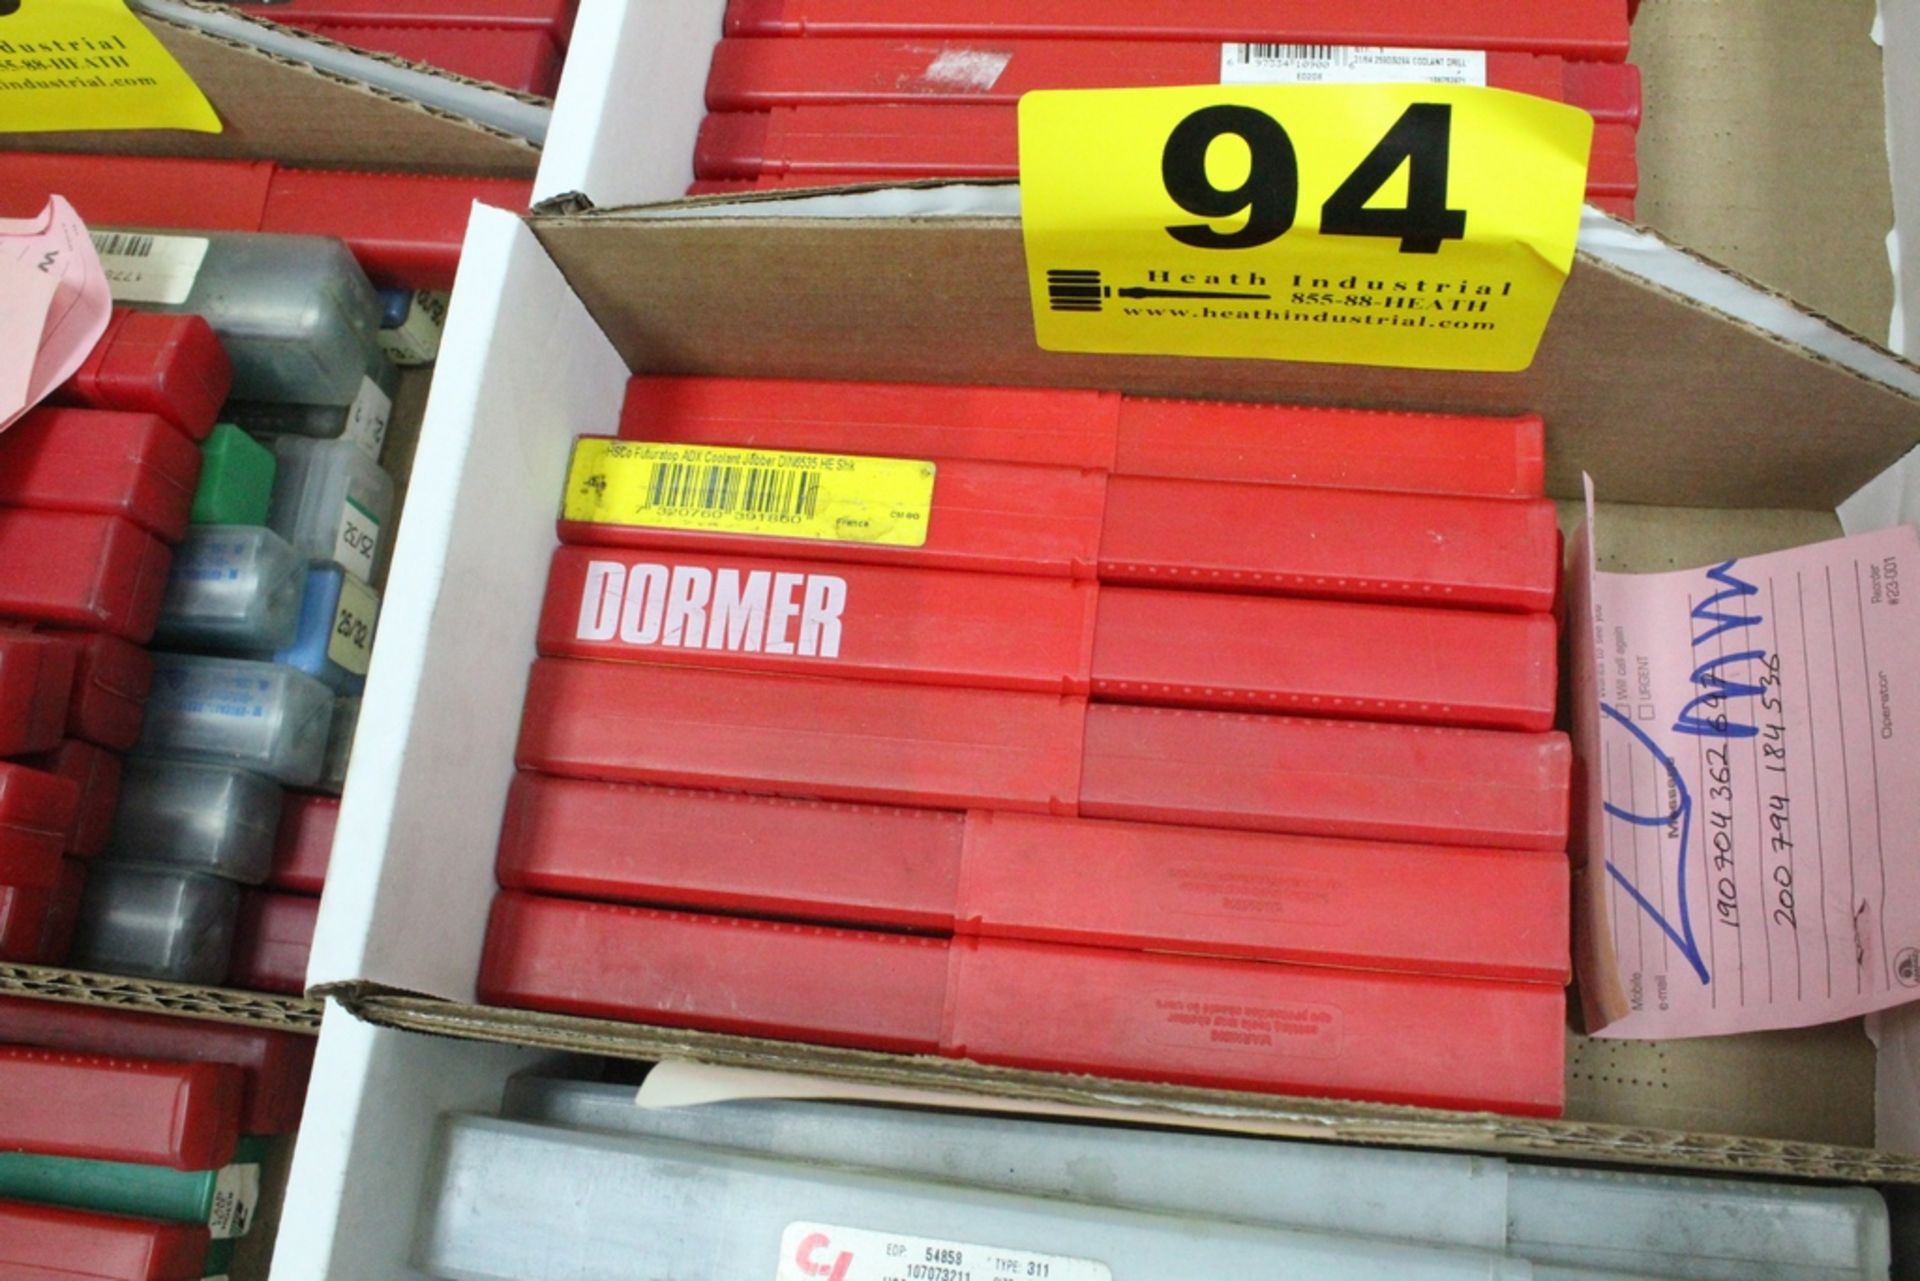 DORMER COOLANT DRILLS (APPEAR NEW IN BOX)